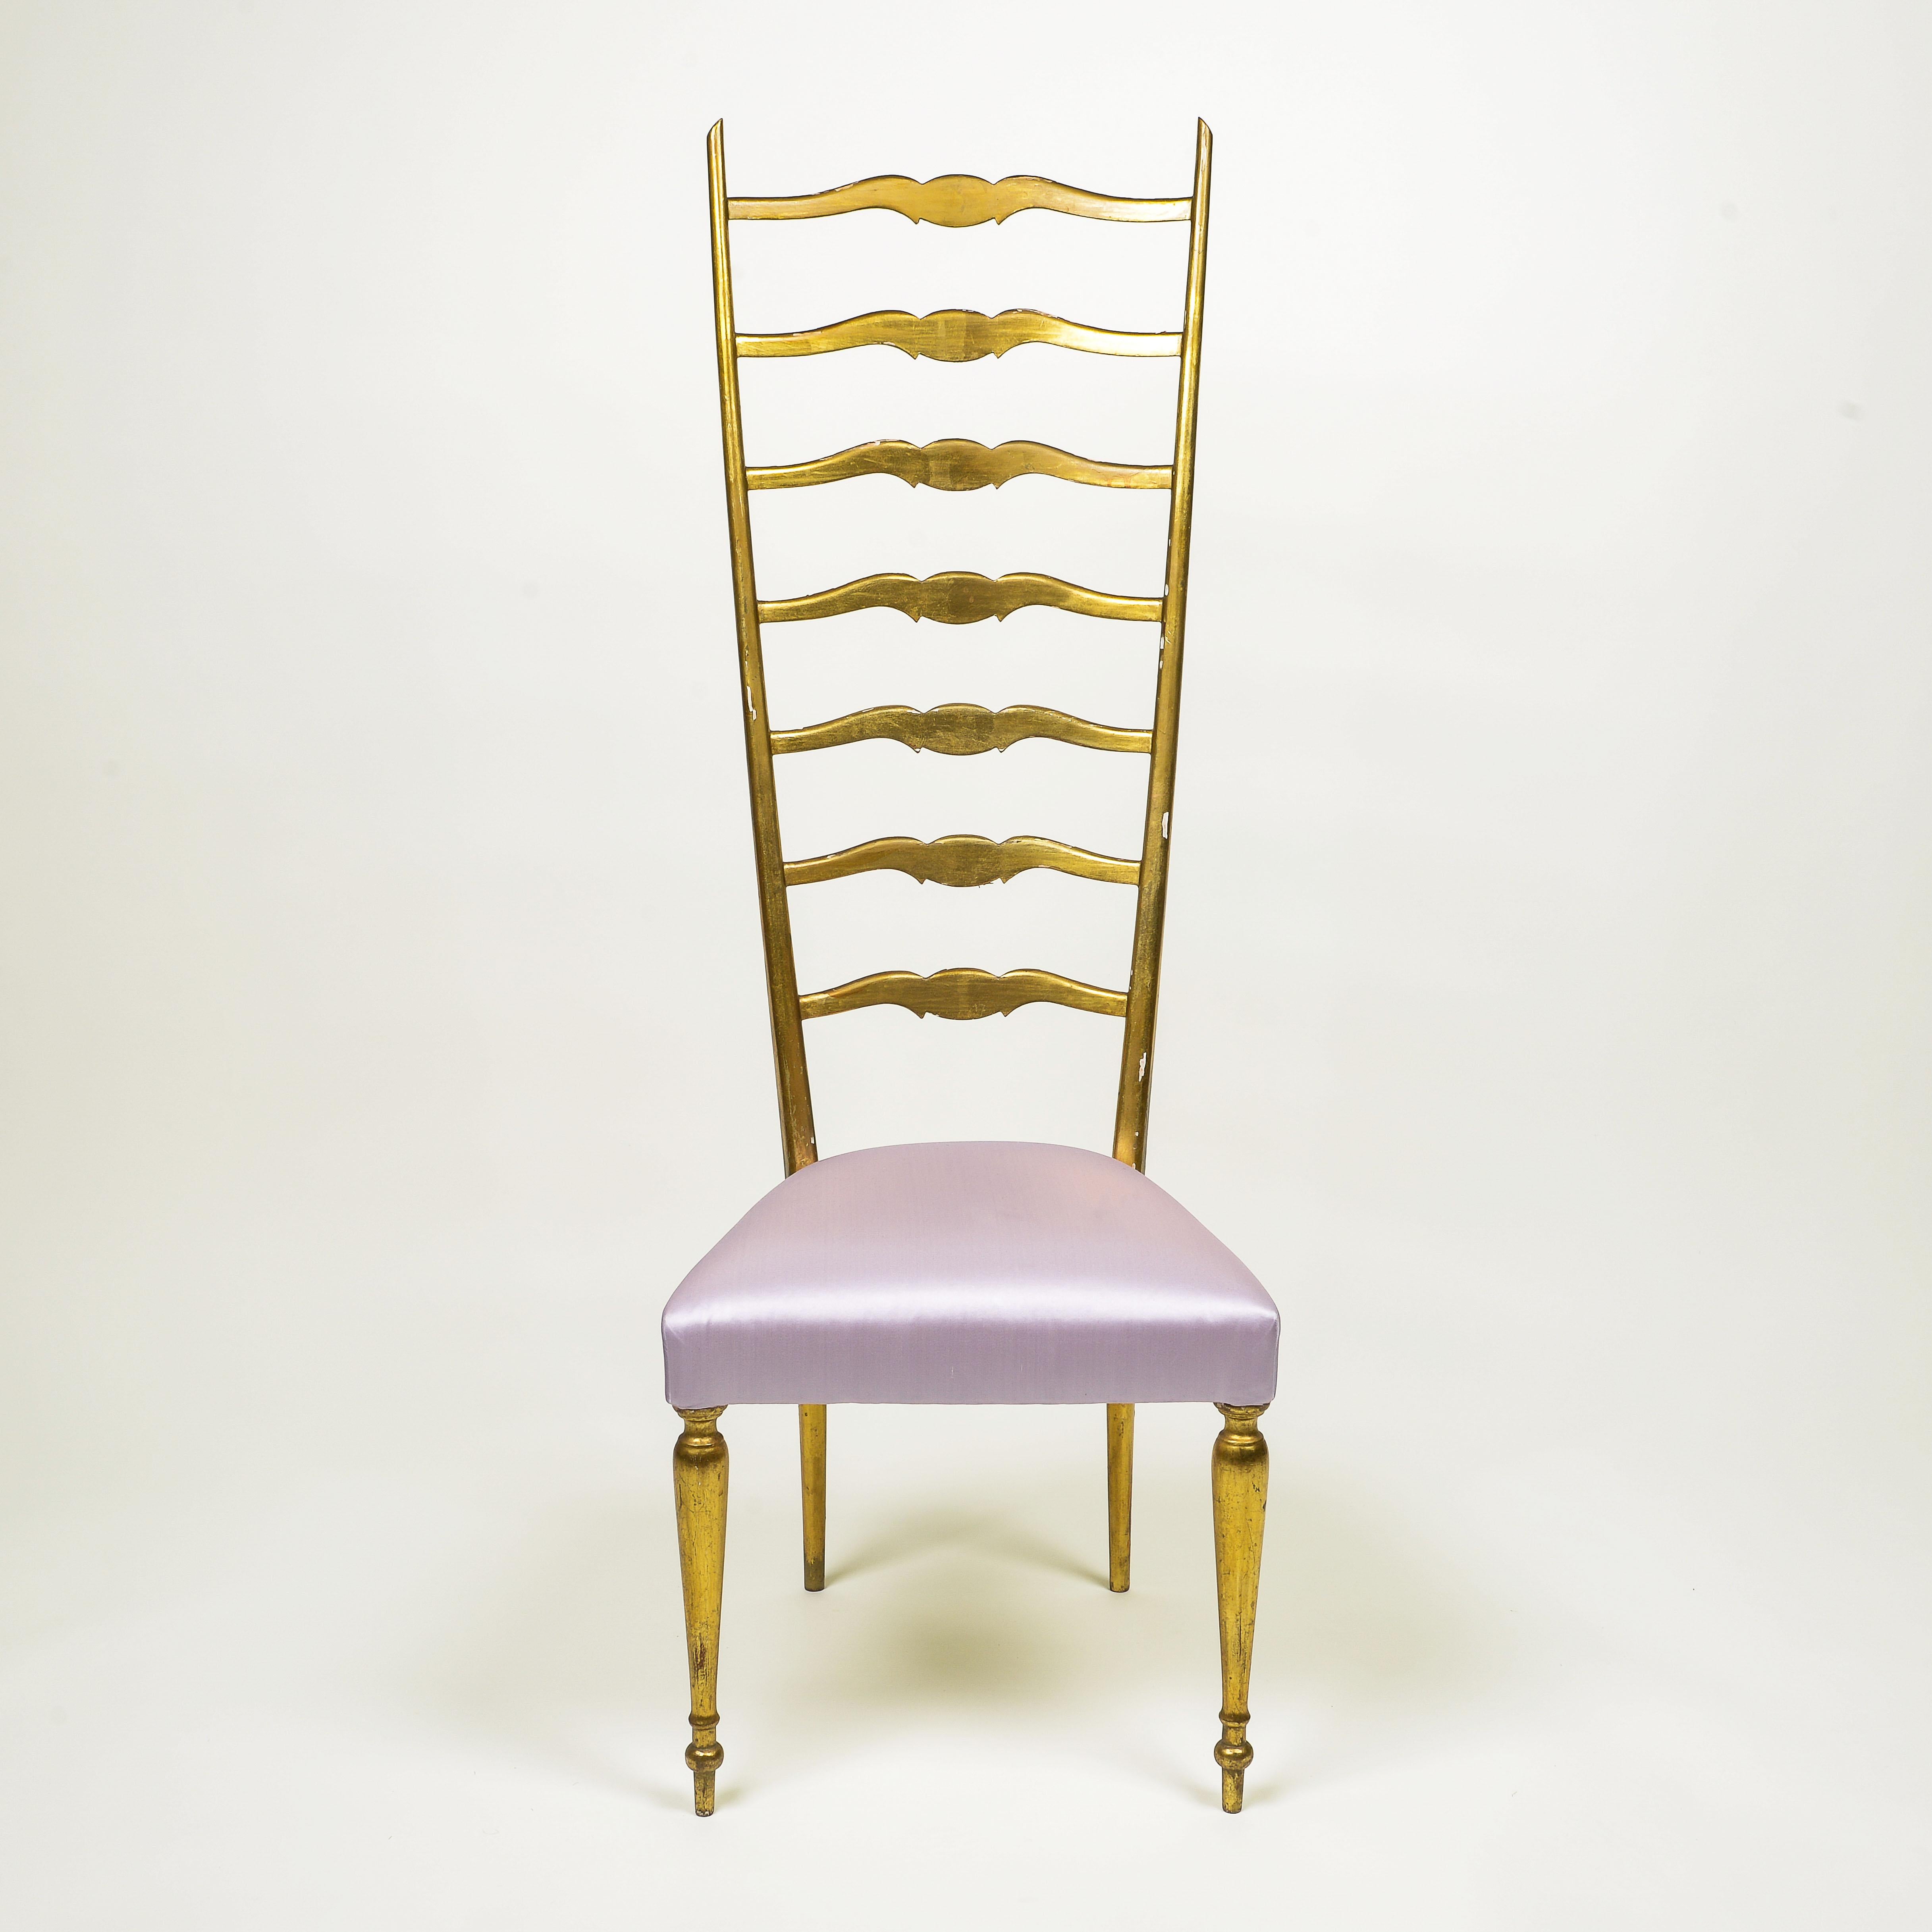 With elongated ladderback; upholstered in lavender silk satin.